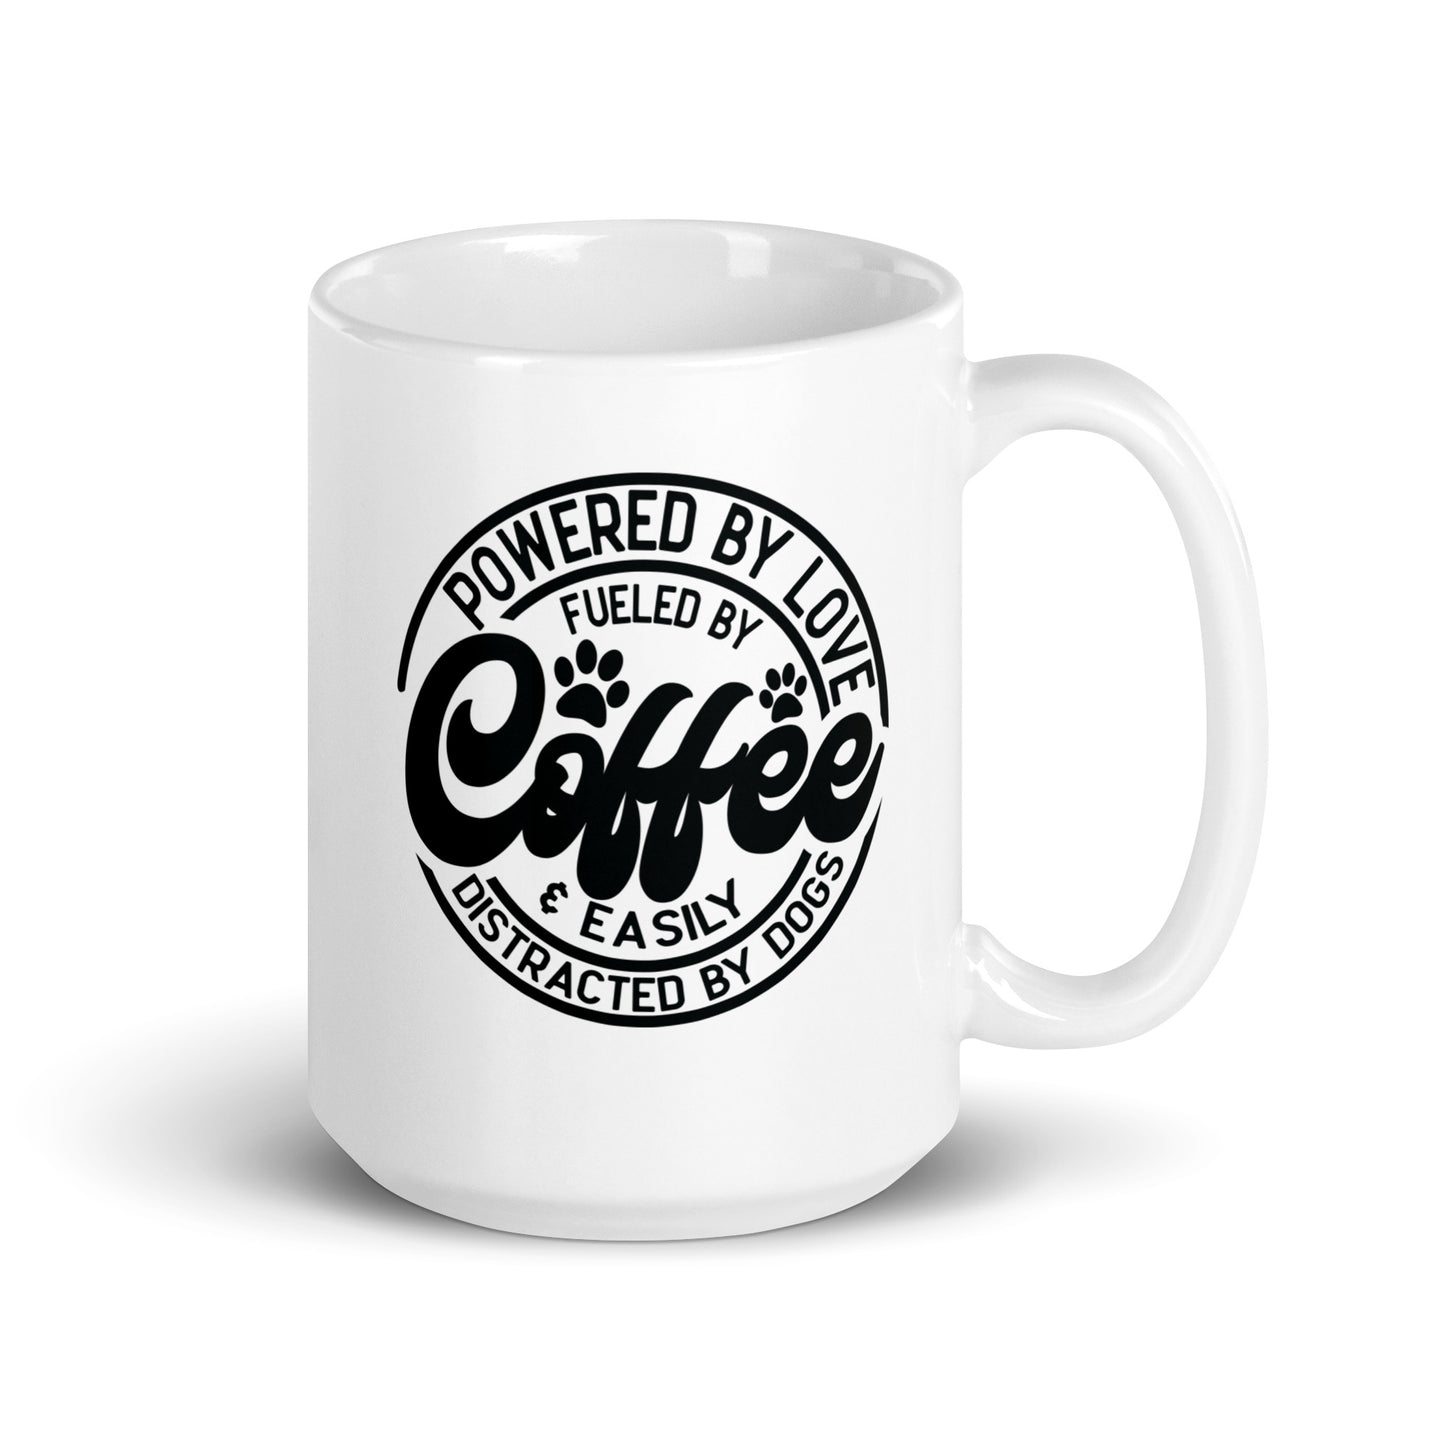 Powered by Love & Easily Distracted By Dogs Coffee Mug